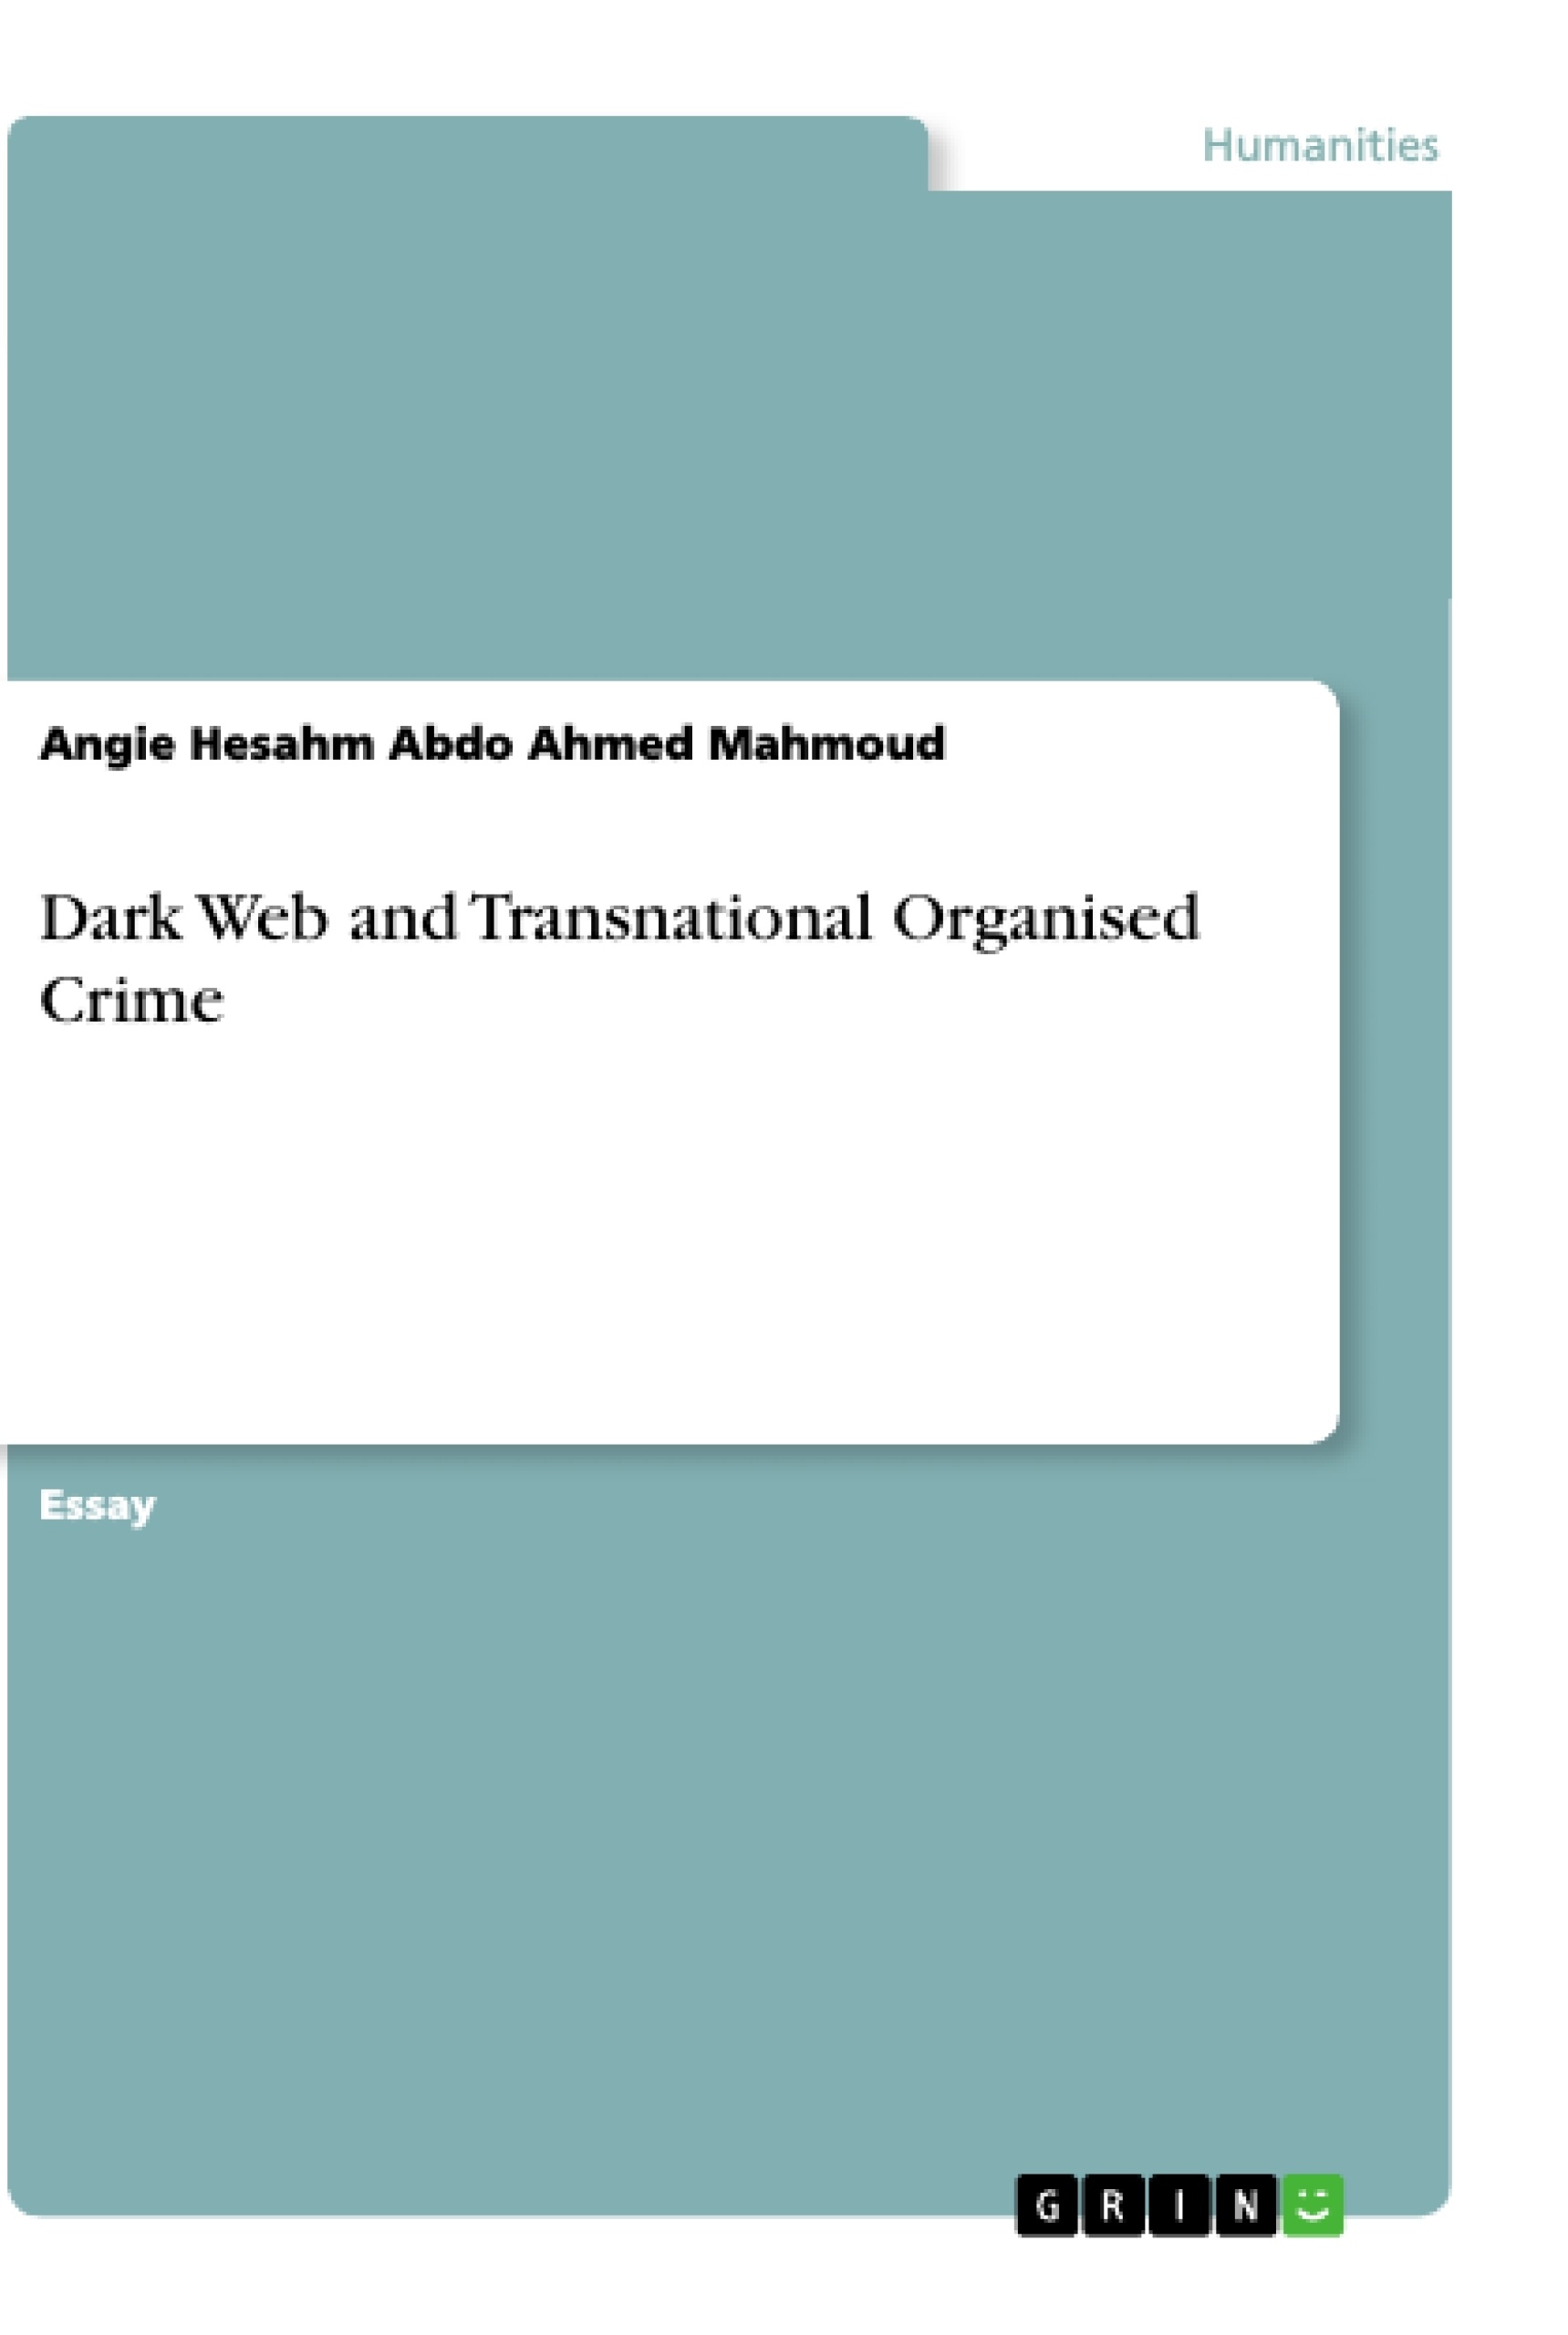 Title: Dark Web and Transnational Organised Crime